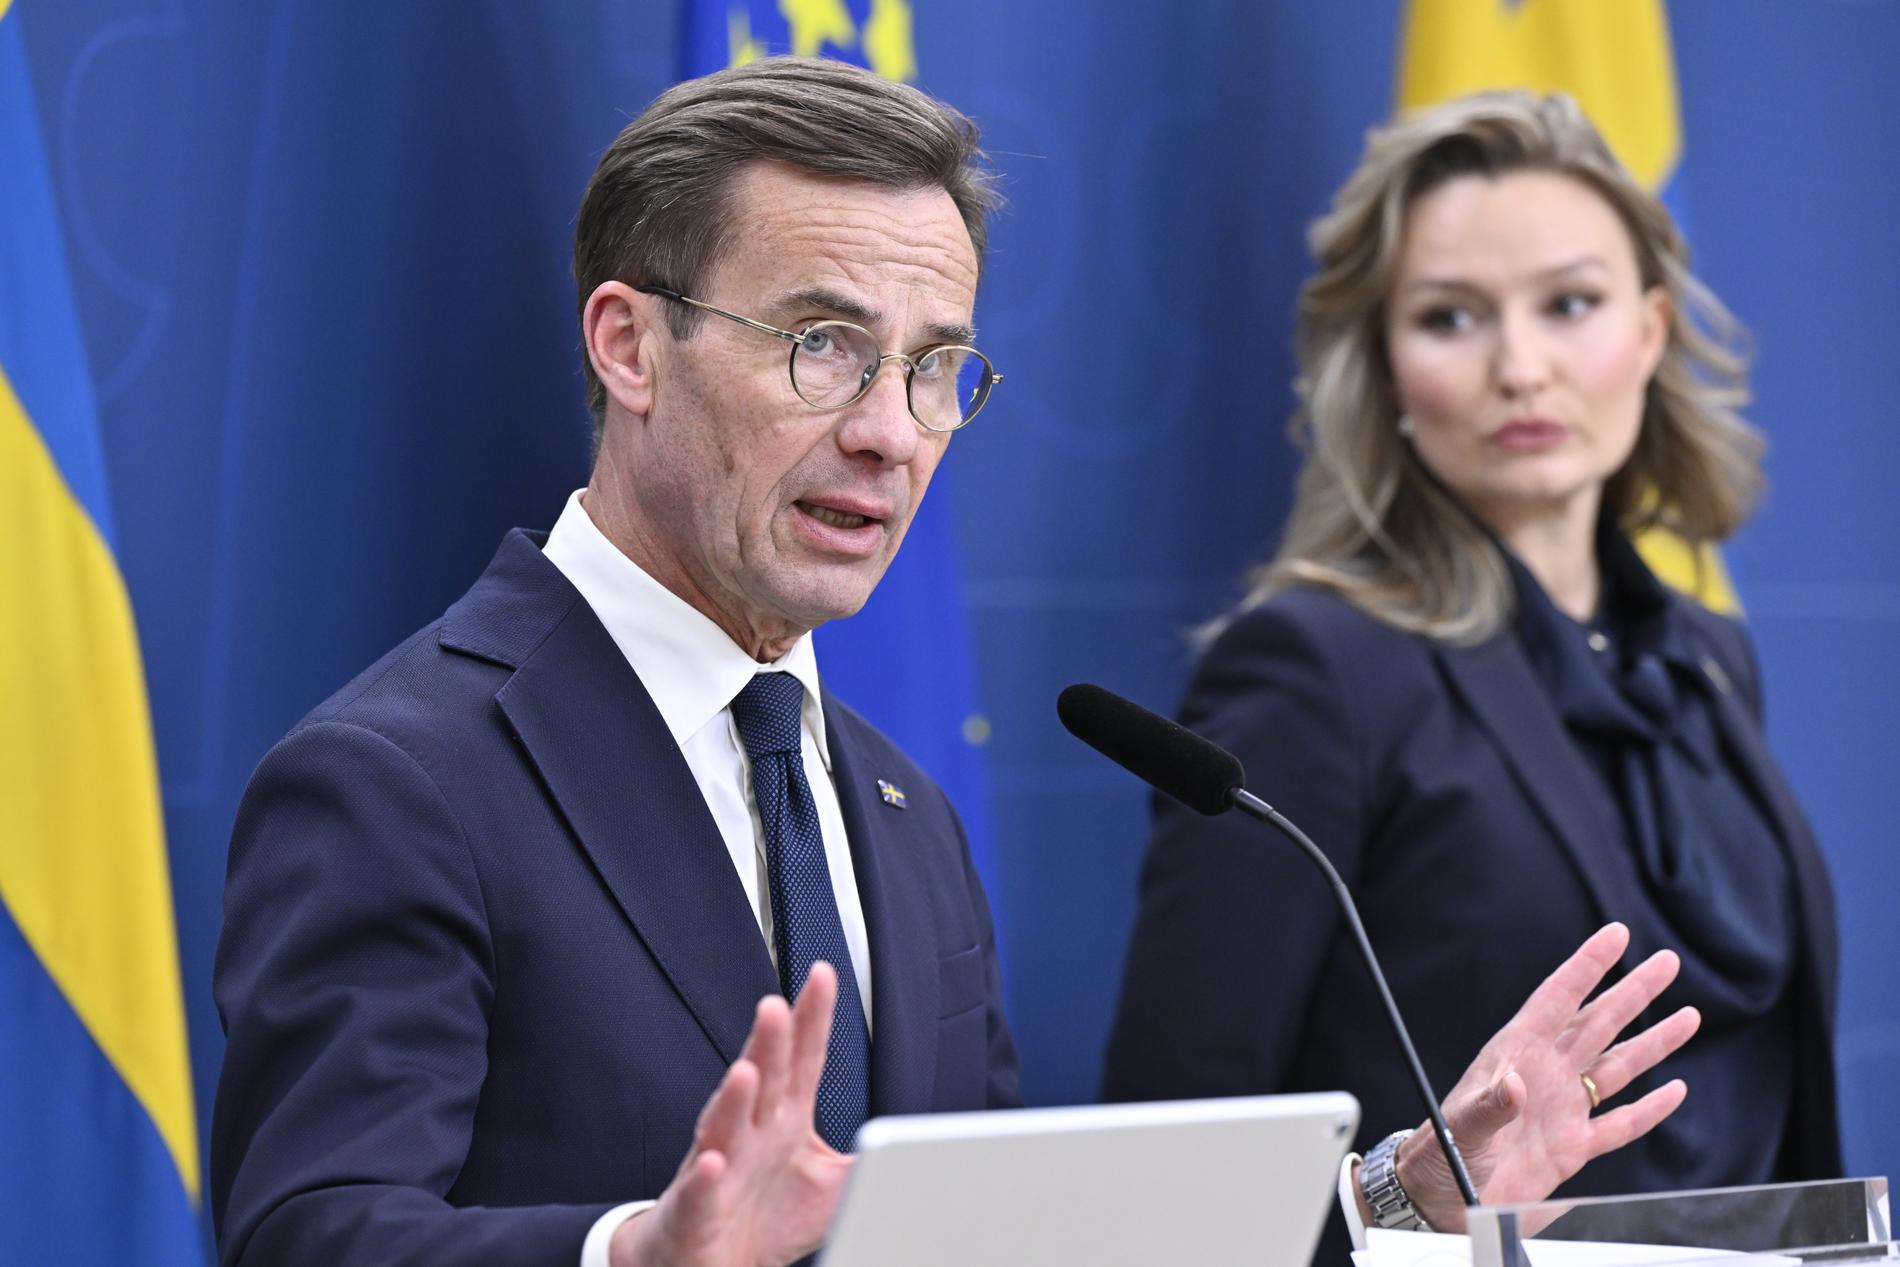 Sweden’s New Climate Action Plan Focuses on Nuclear Power to Achieve Net-Zero Emissions by 2045